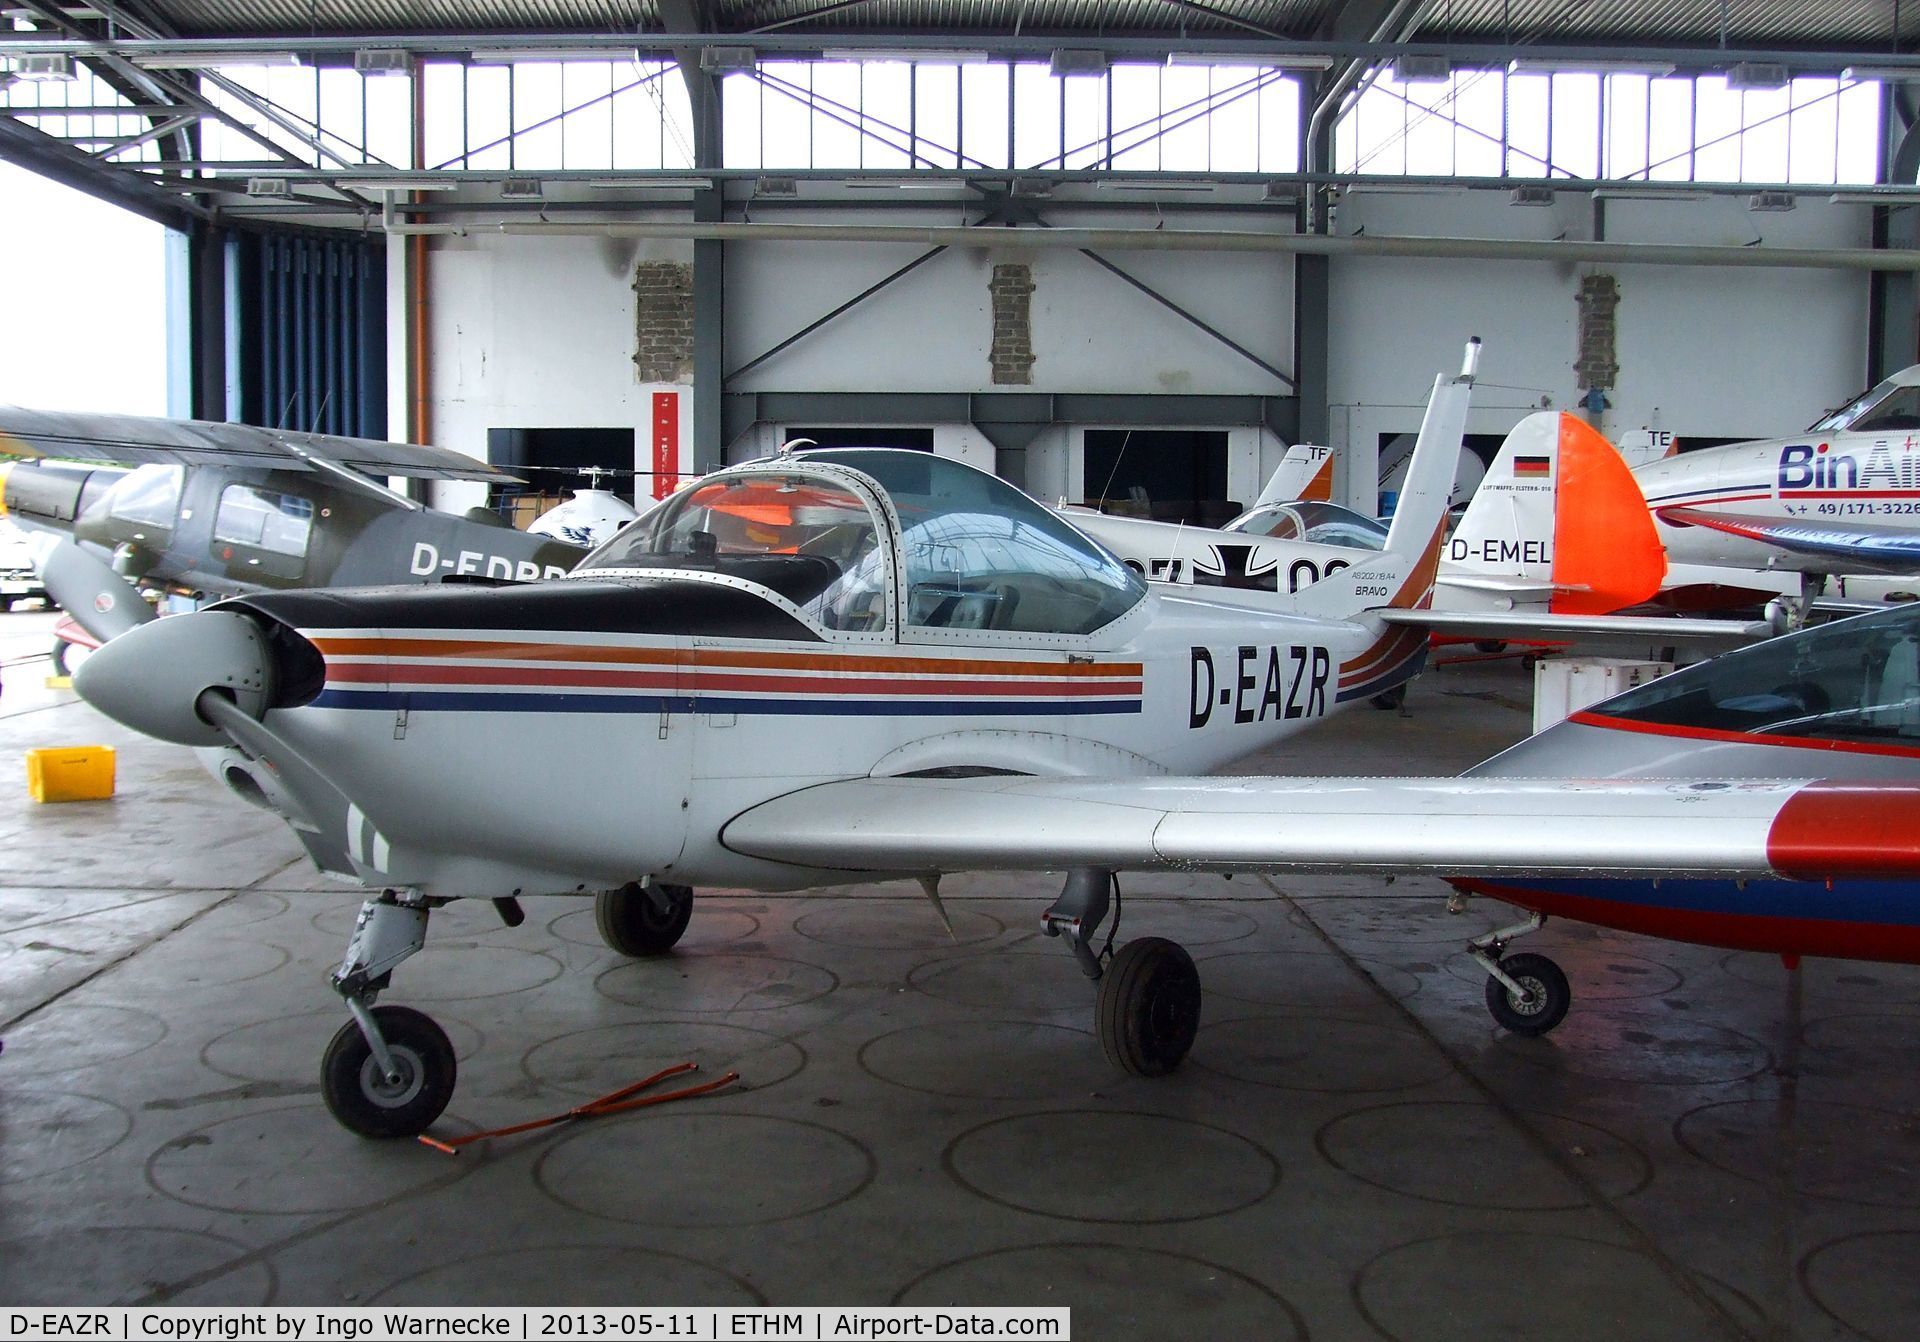 D-EAZR, 1988 FFA AS-202/18A-4 Bravo C/N 233, FFA AS.202/18 A4 Bravo during an open day at the Fliegendes Museum Mendig (Flying Museum) at former German Army Aviation base, now civilian Mendig airfield